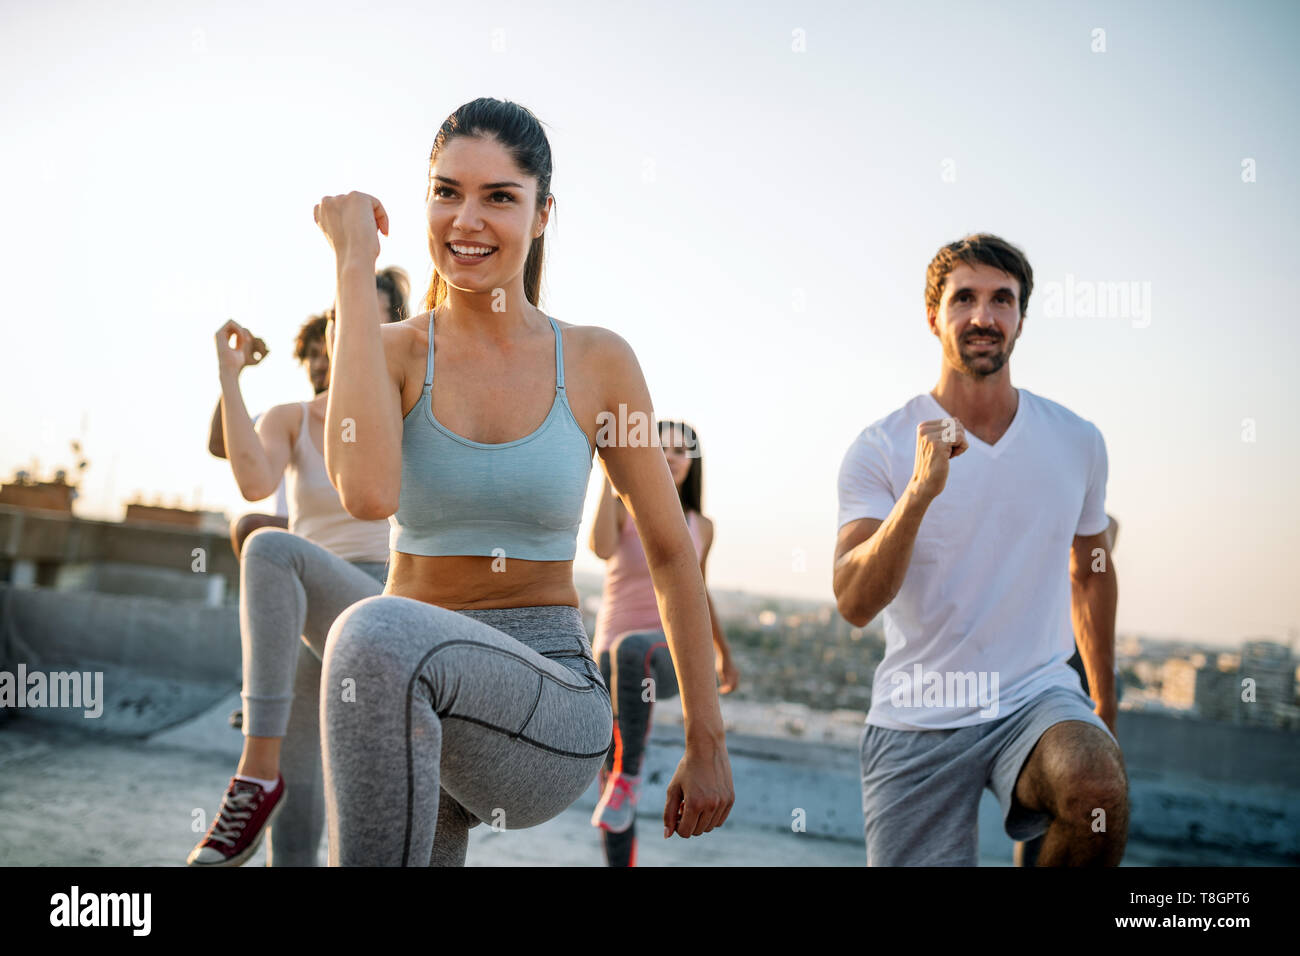 Group of happy fit friends exercising outdoor in city Stock Photo